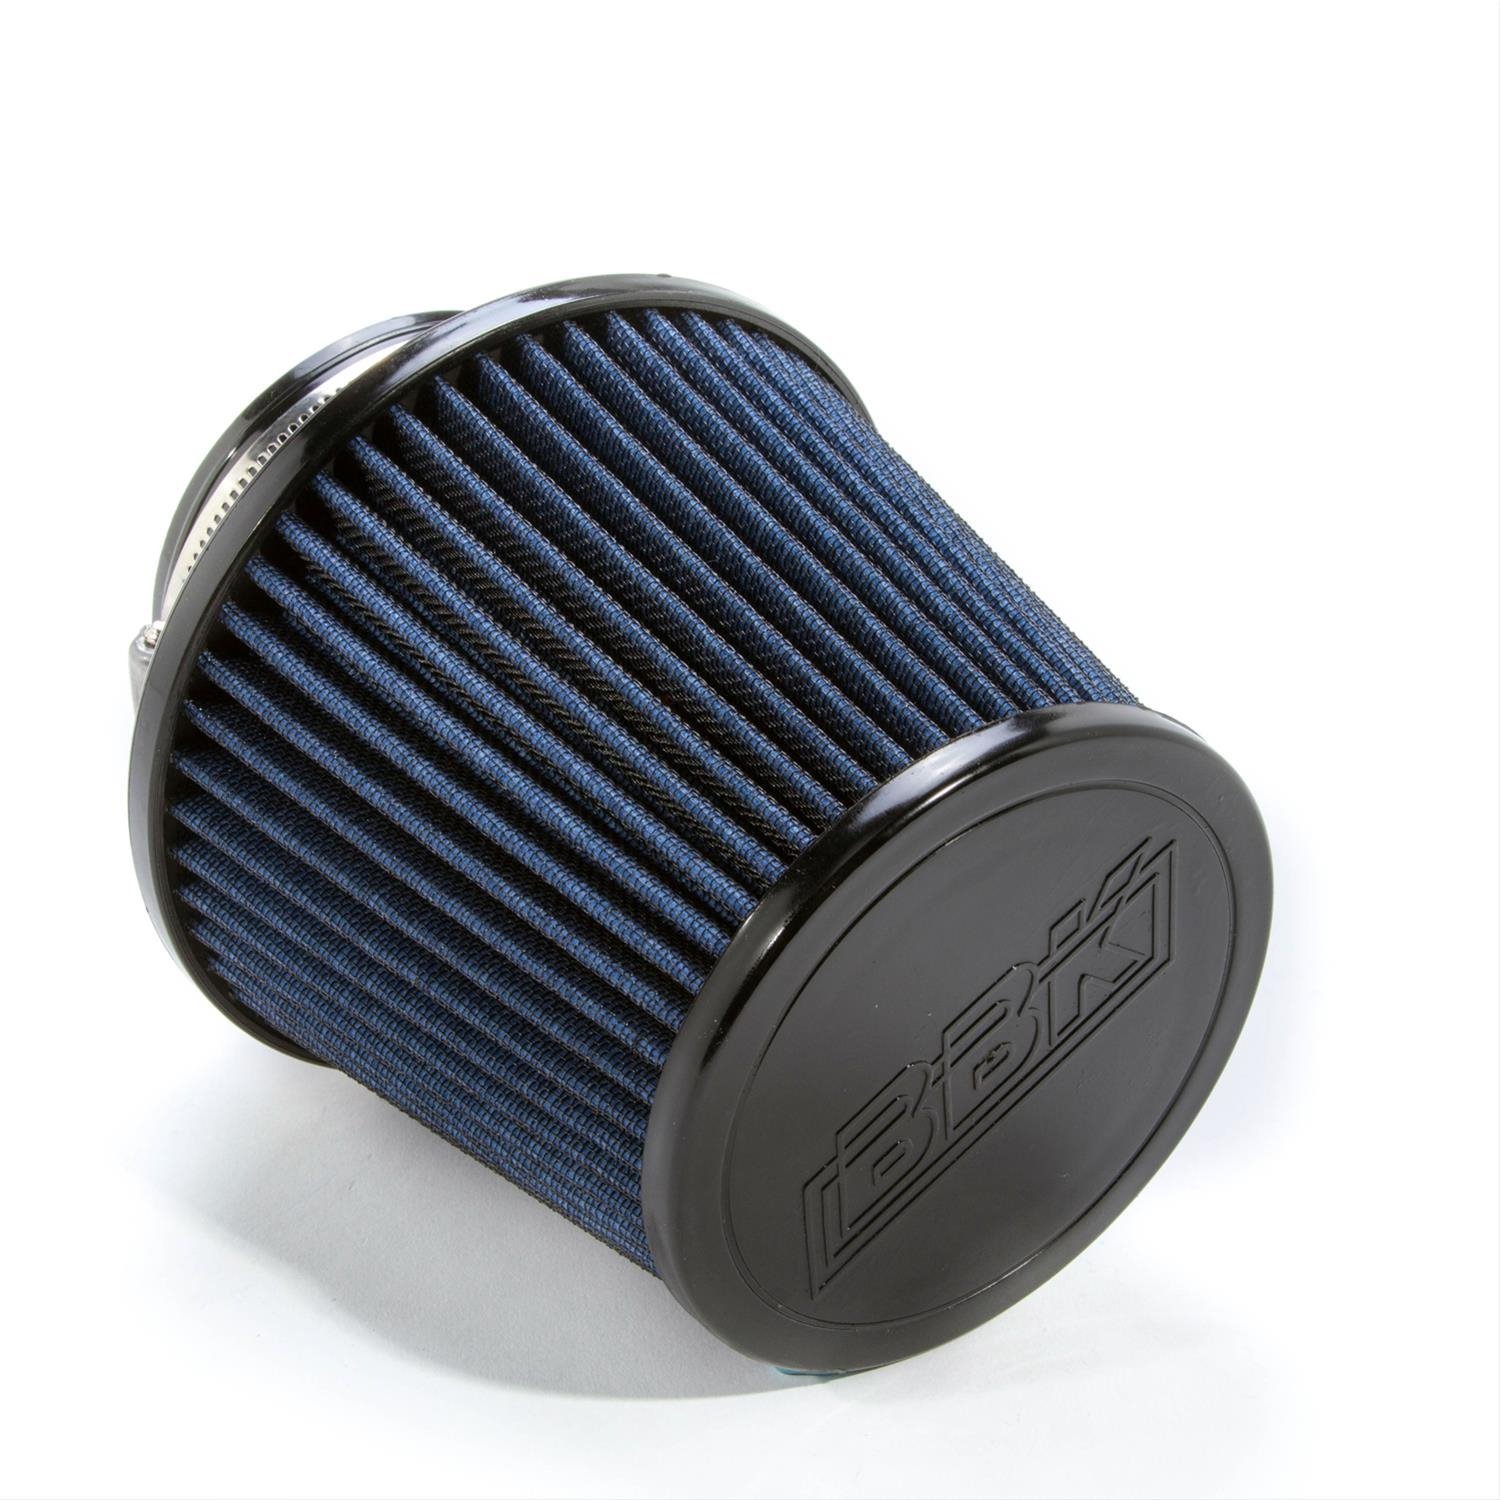 Conical Cold Air Intake Filter High Flow Washable Cotton Element For BBK Cold Air Kits: